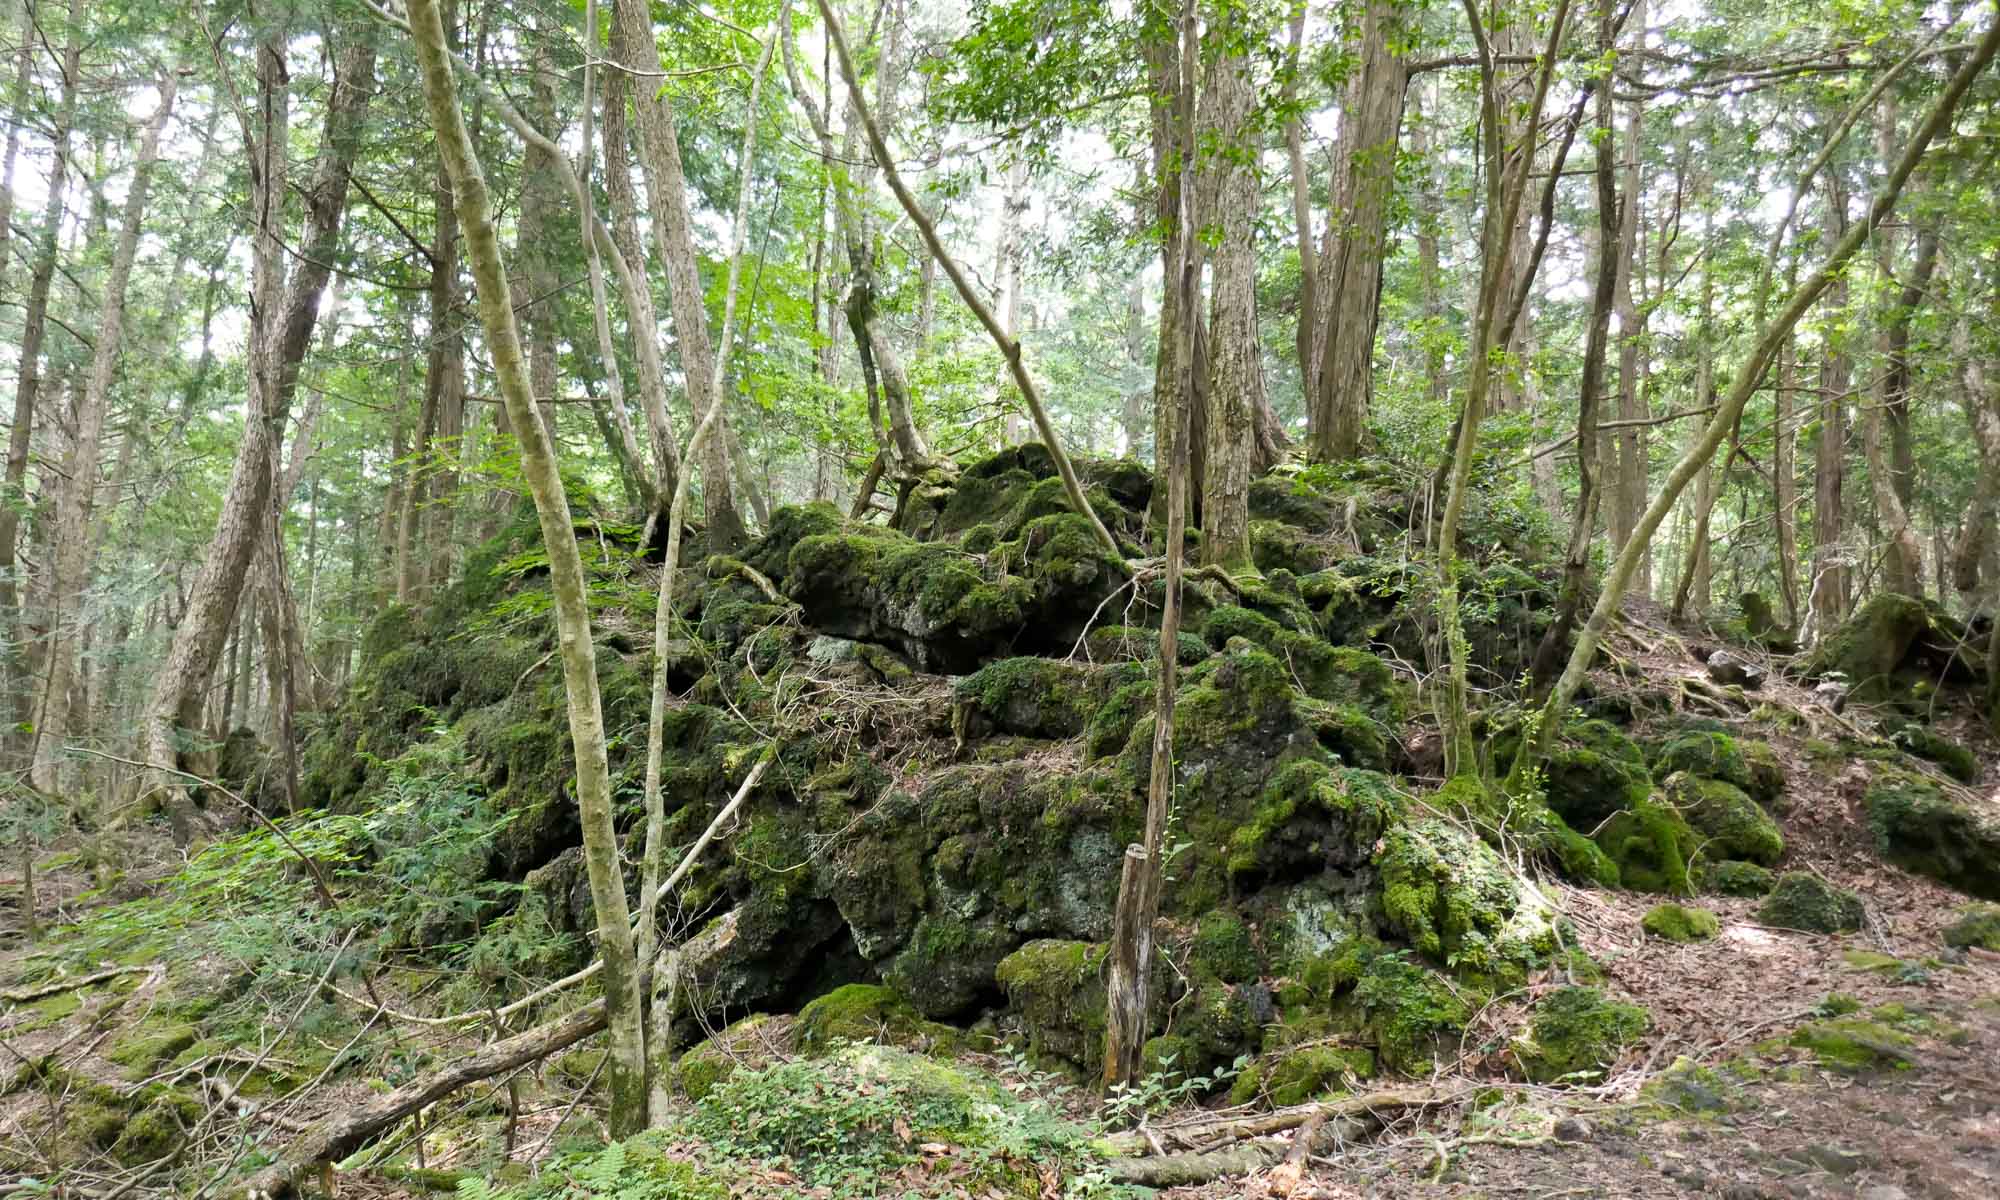 The forest lies on 35 square km of uneven (Fuji) lava ground, covered with moss